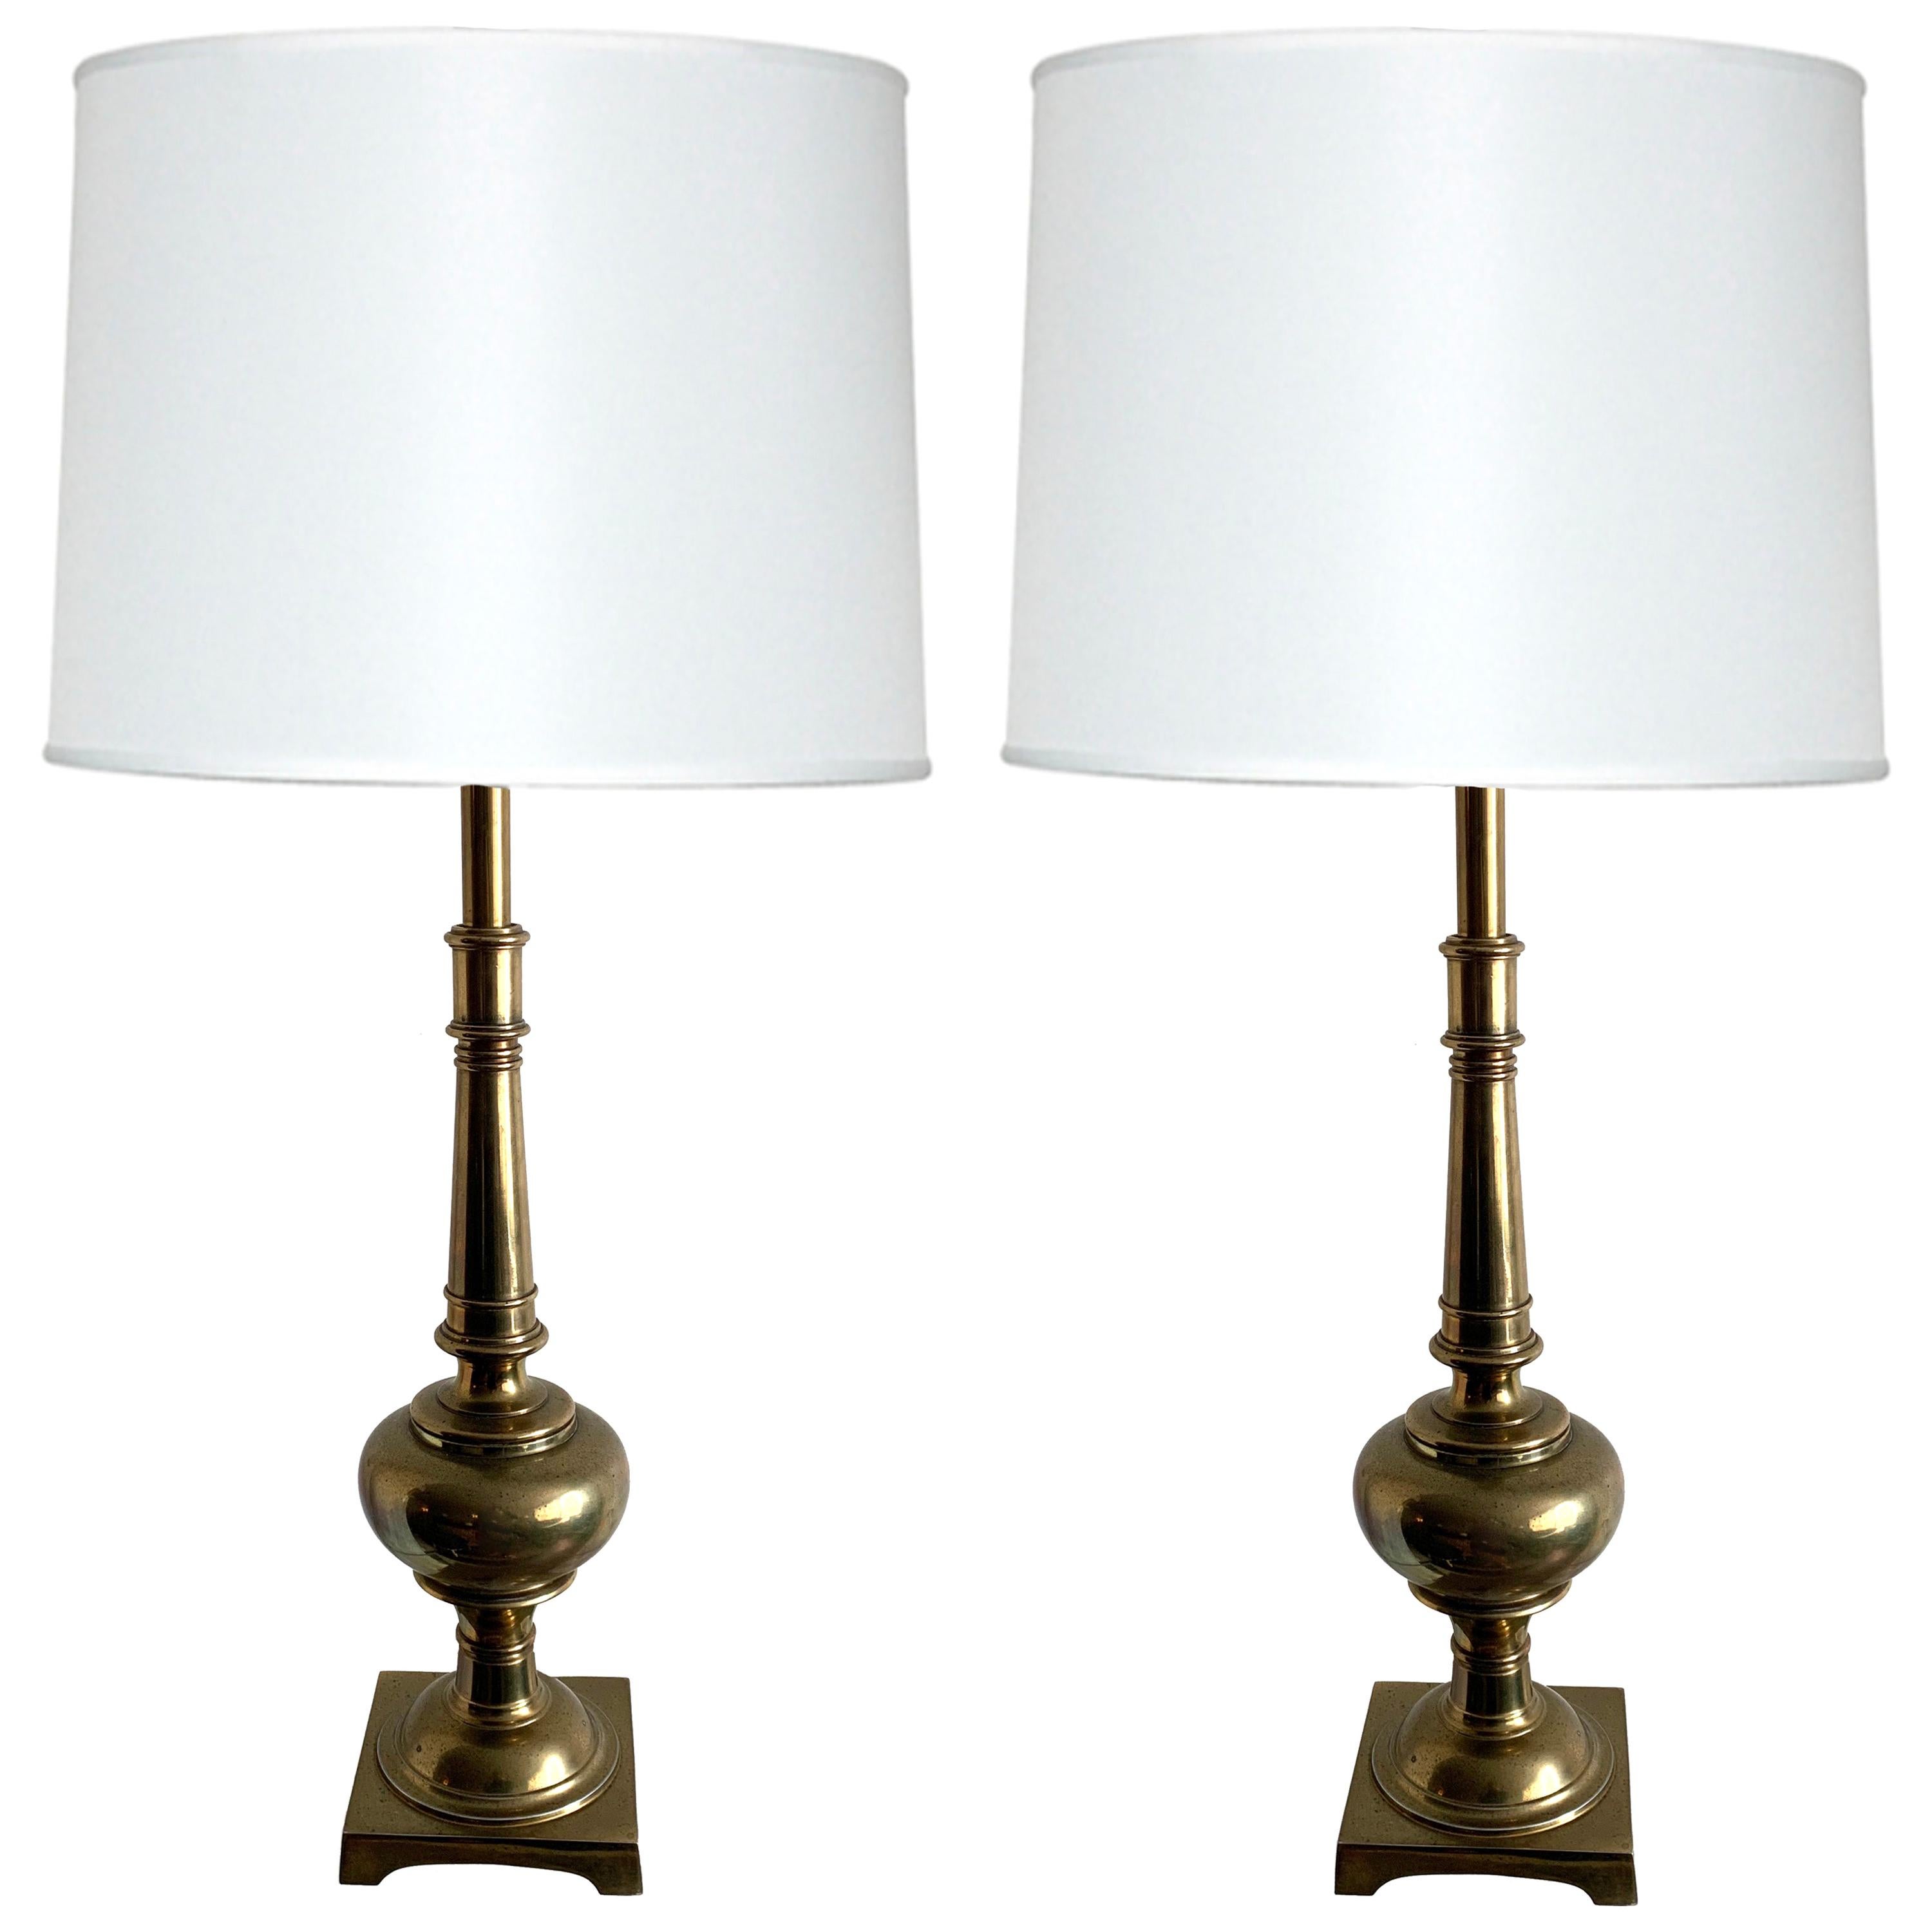 Pair of Stiffel Solid Brass Table Lamps